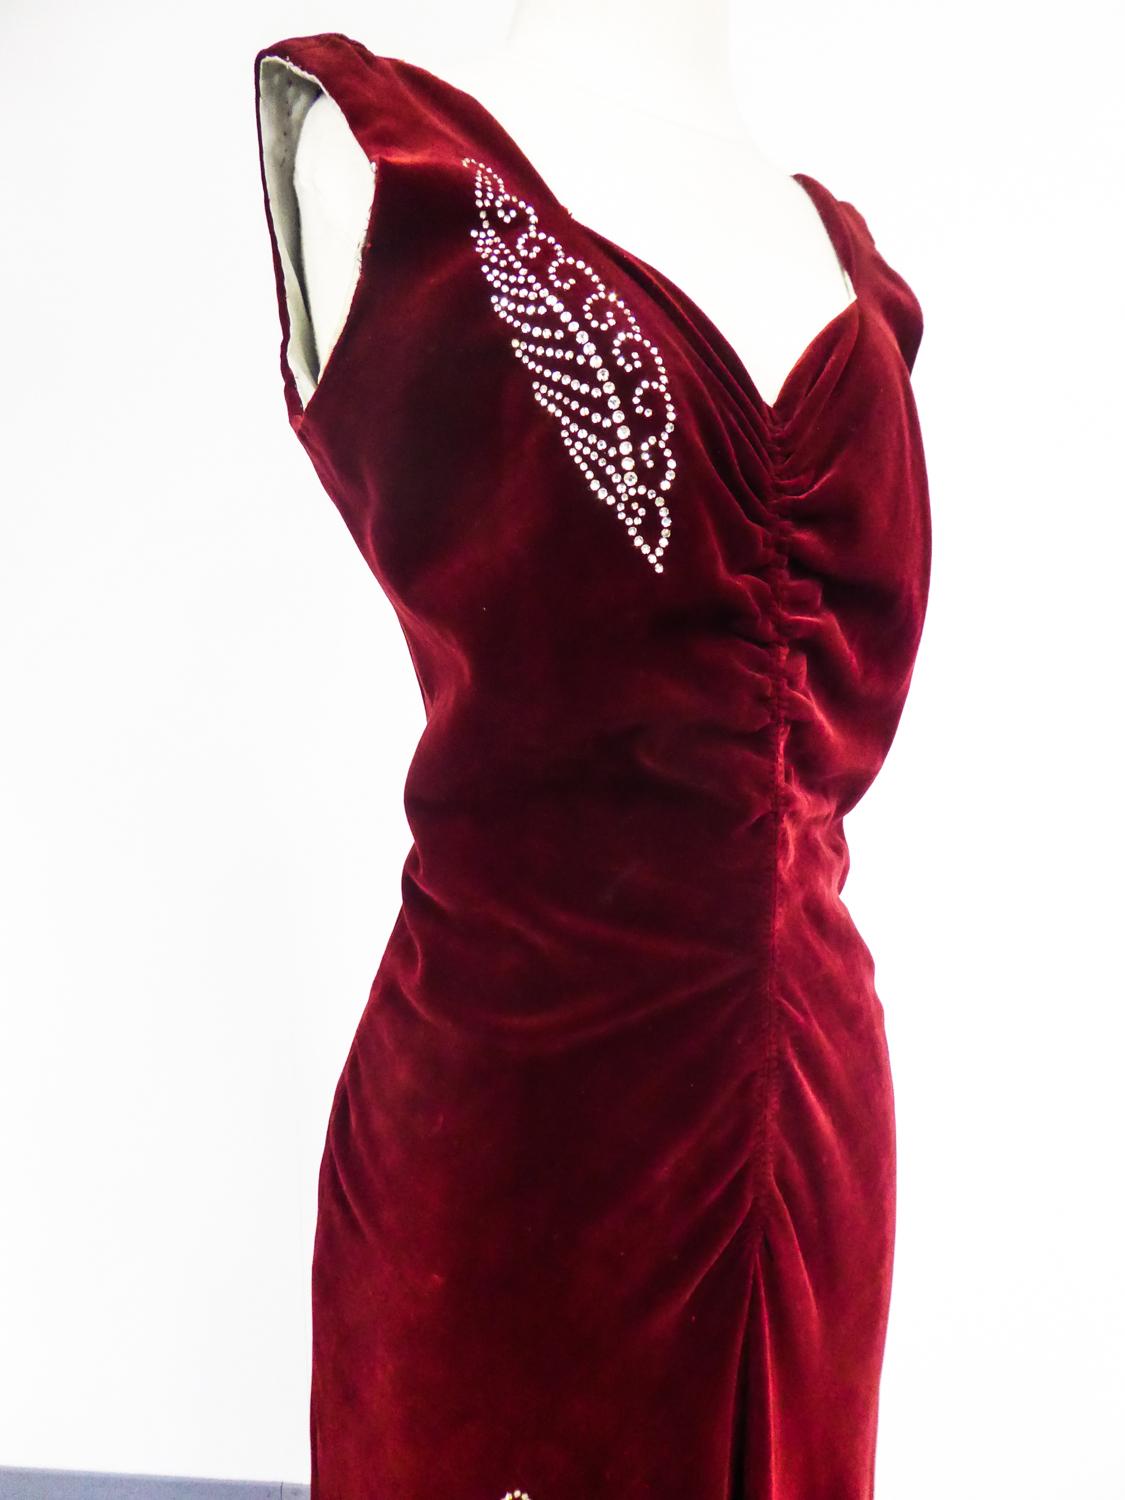 Circa 1935
France

Rare long collector's evening dress, French Haute Couture by Nicole Groult, famous sister of Paul Poiret and dating from the 1935s. Sleeveless dress in carmine red silk velvet underlined with Swarovski rhinestone embroidery with